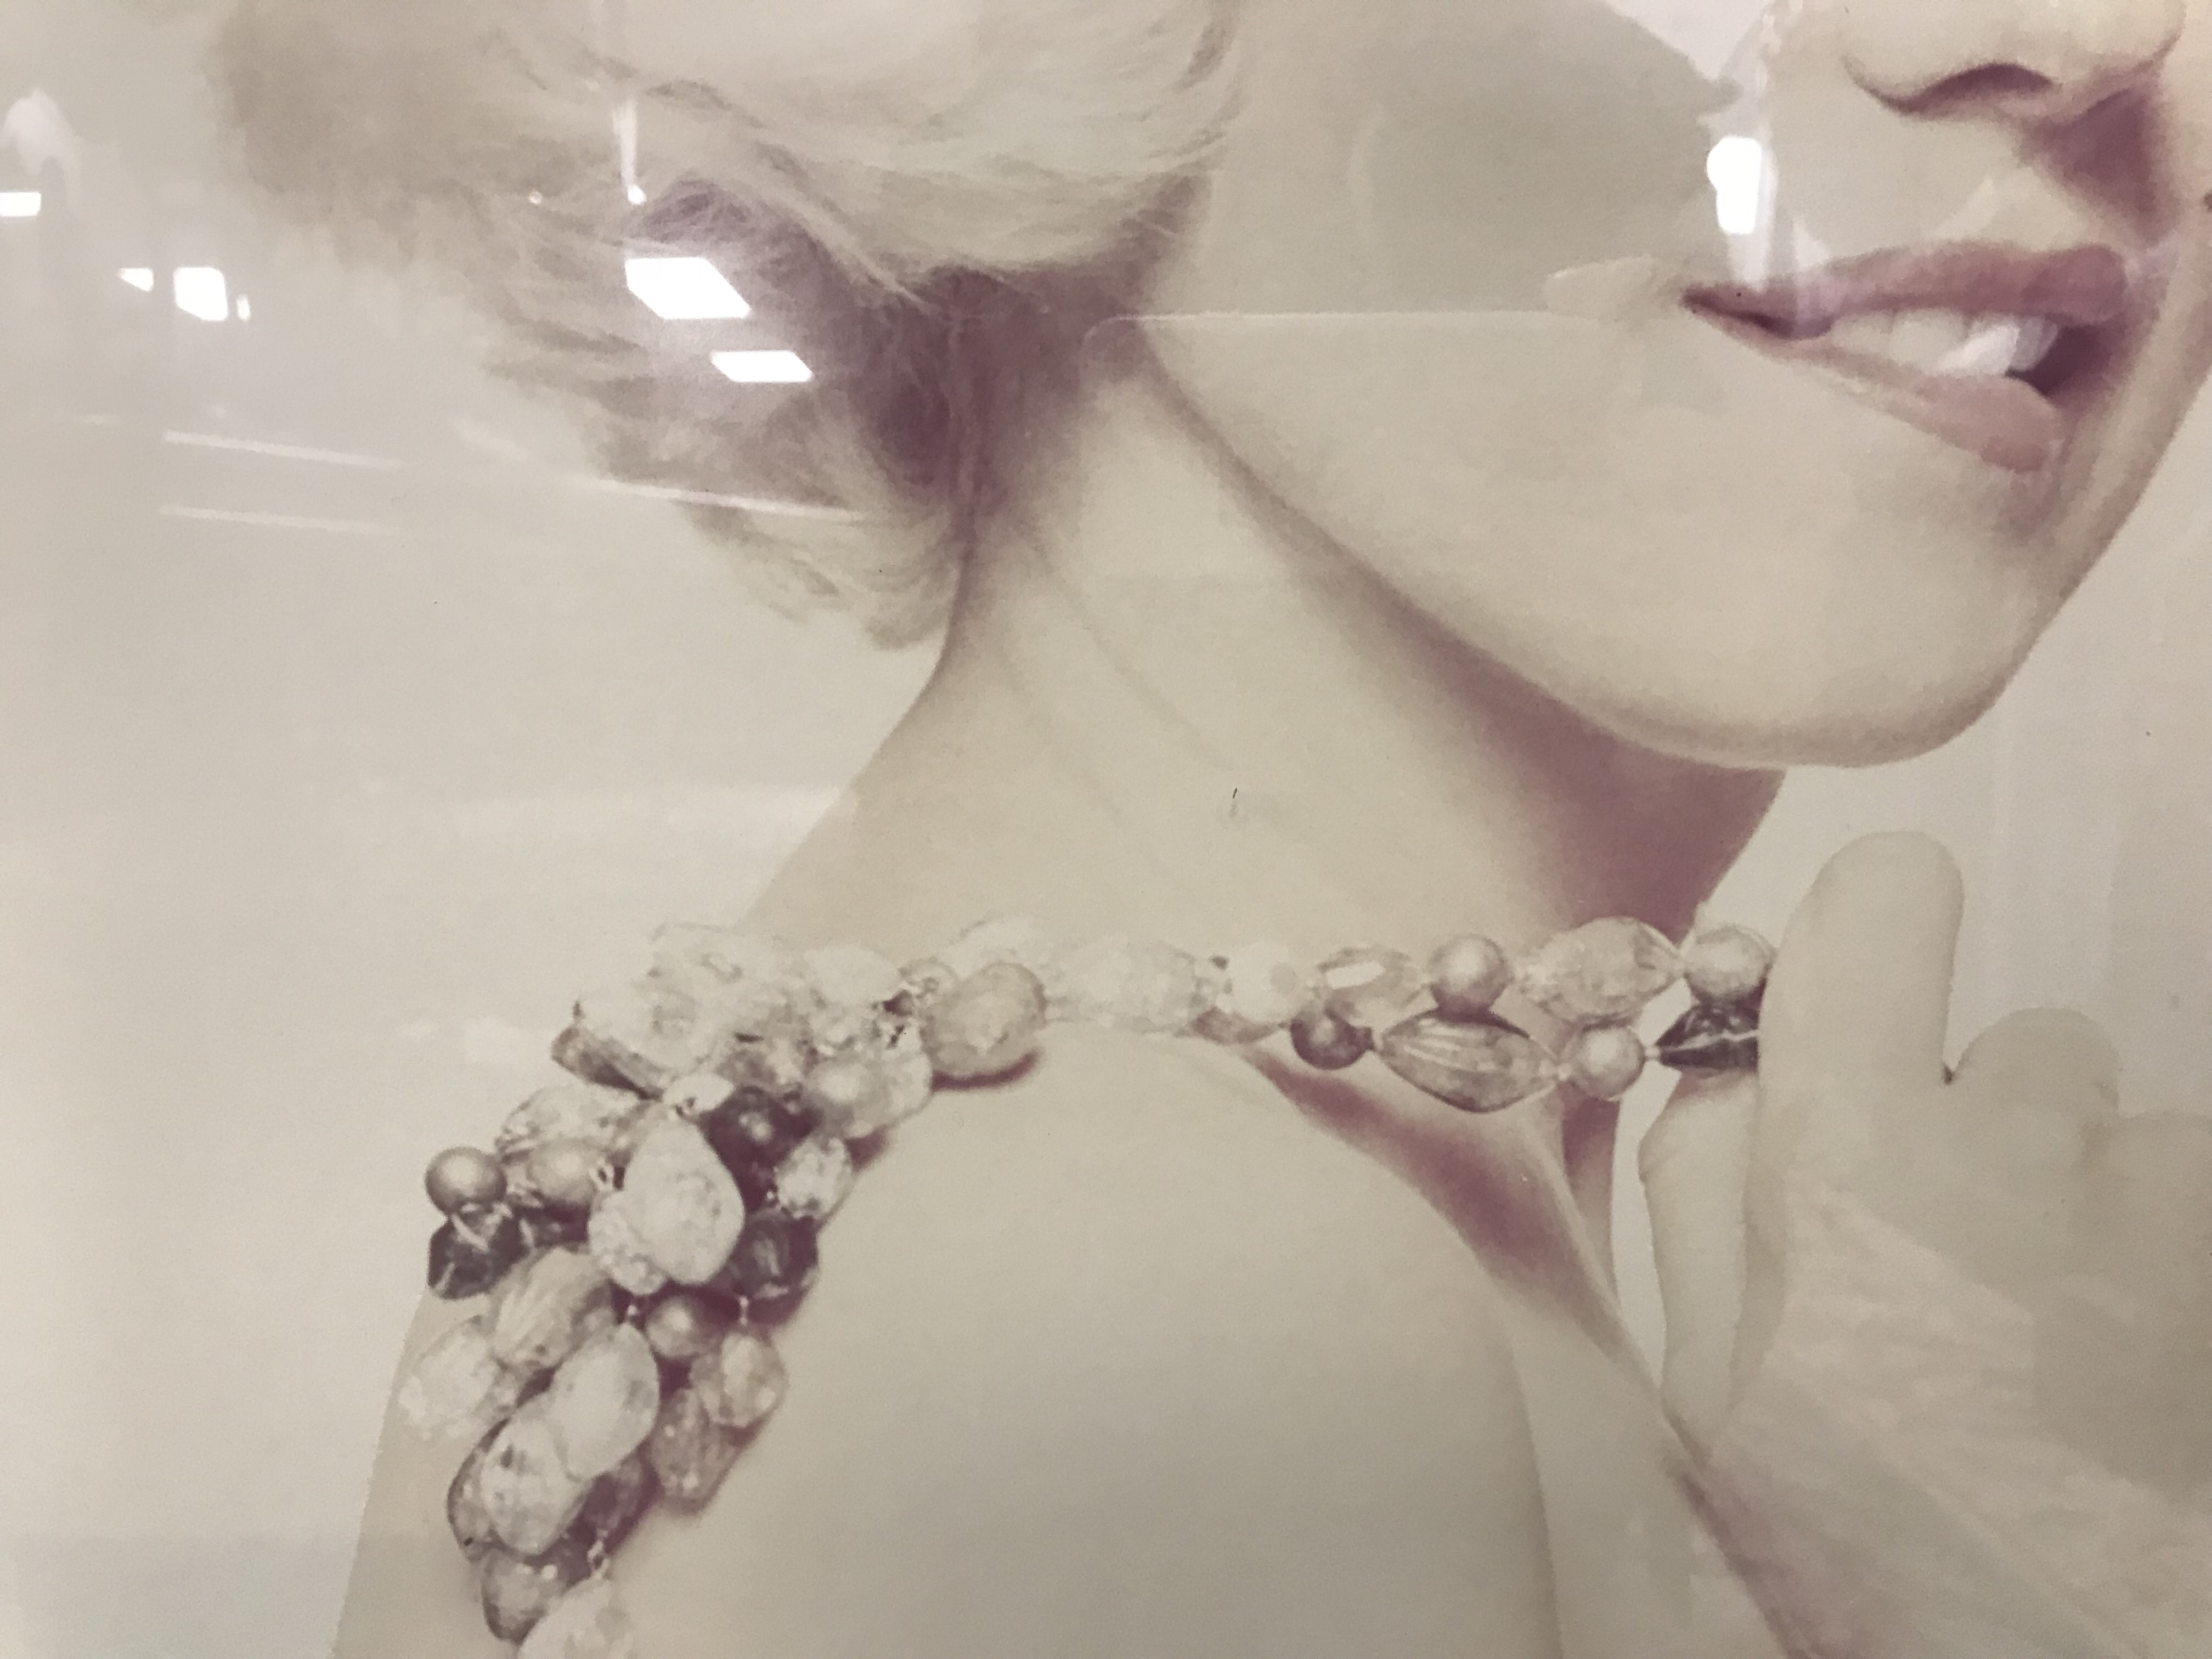 BERT STERN "Marilyn with bead necklace" limited edition photographic print from the last sitting - Image 24 of 38